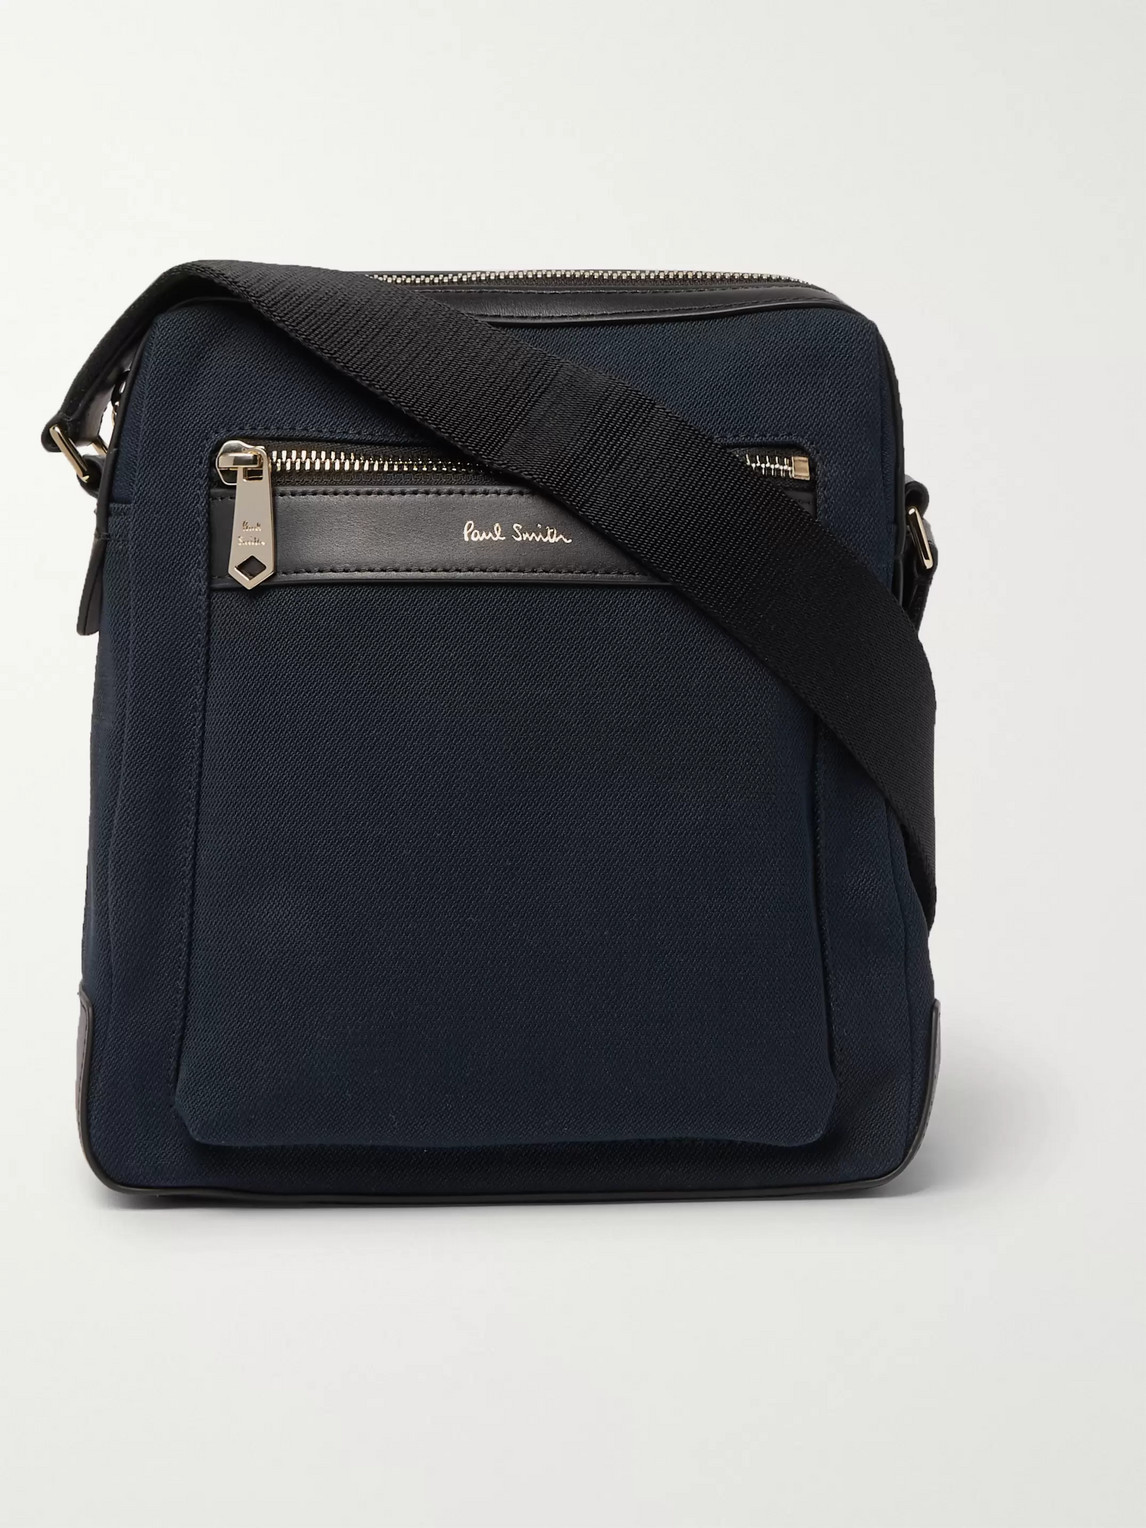 PAUL SMITH LEATHER-TRIMMED CANVAS MESSENGER BAG